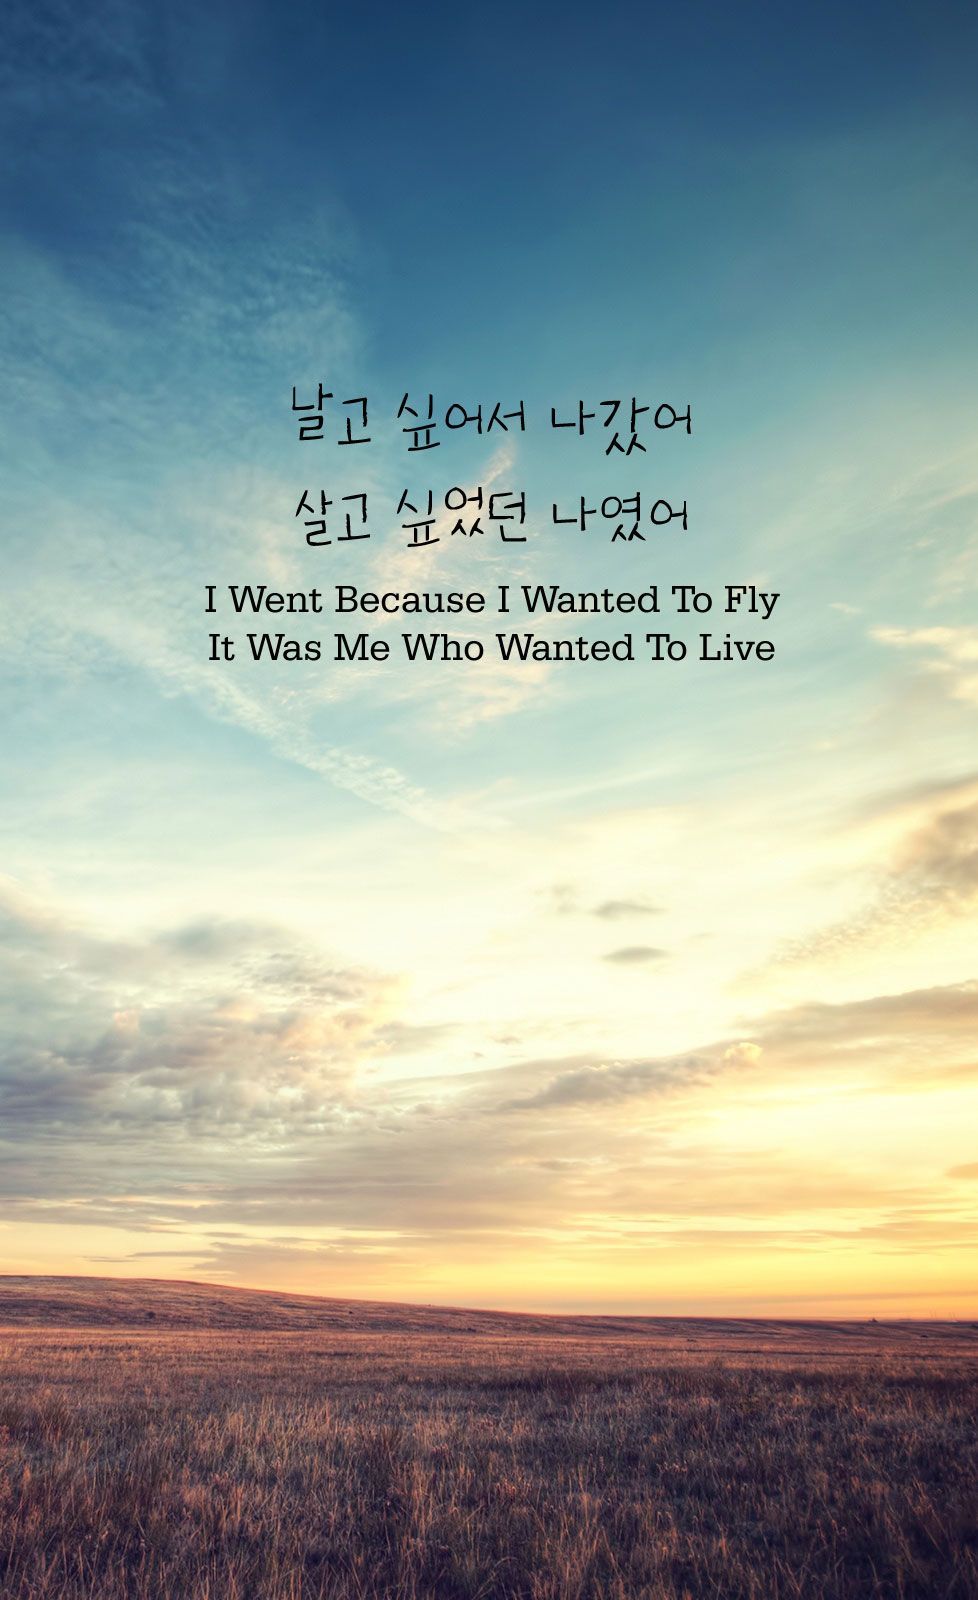 I Went Because I Wanted To Fly, It Was Me Who Wanted To Live (날고 싶어서 나갔어, 살고 싶었던 나였어) #글님. Korean quotes, Korea quotes, Korean phrases